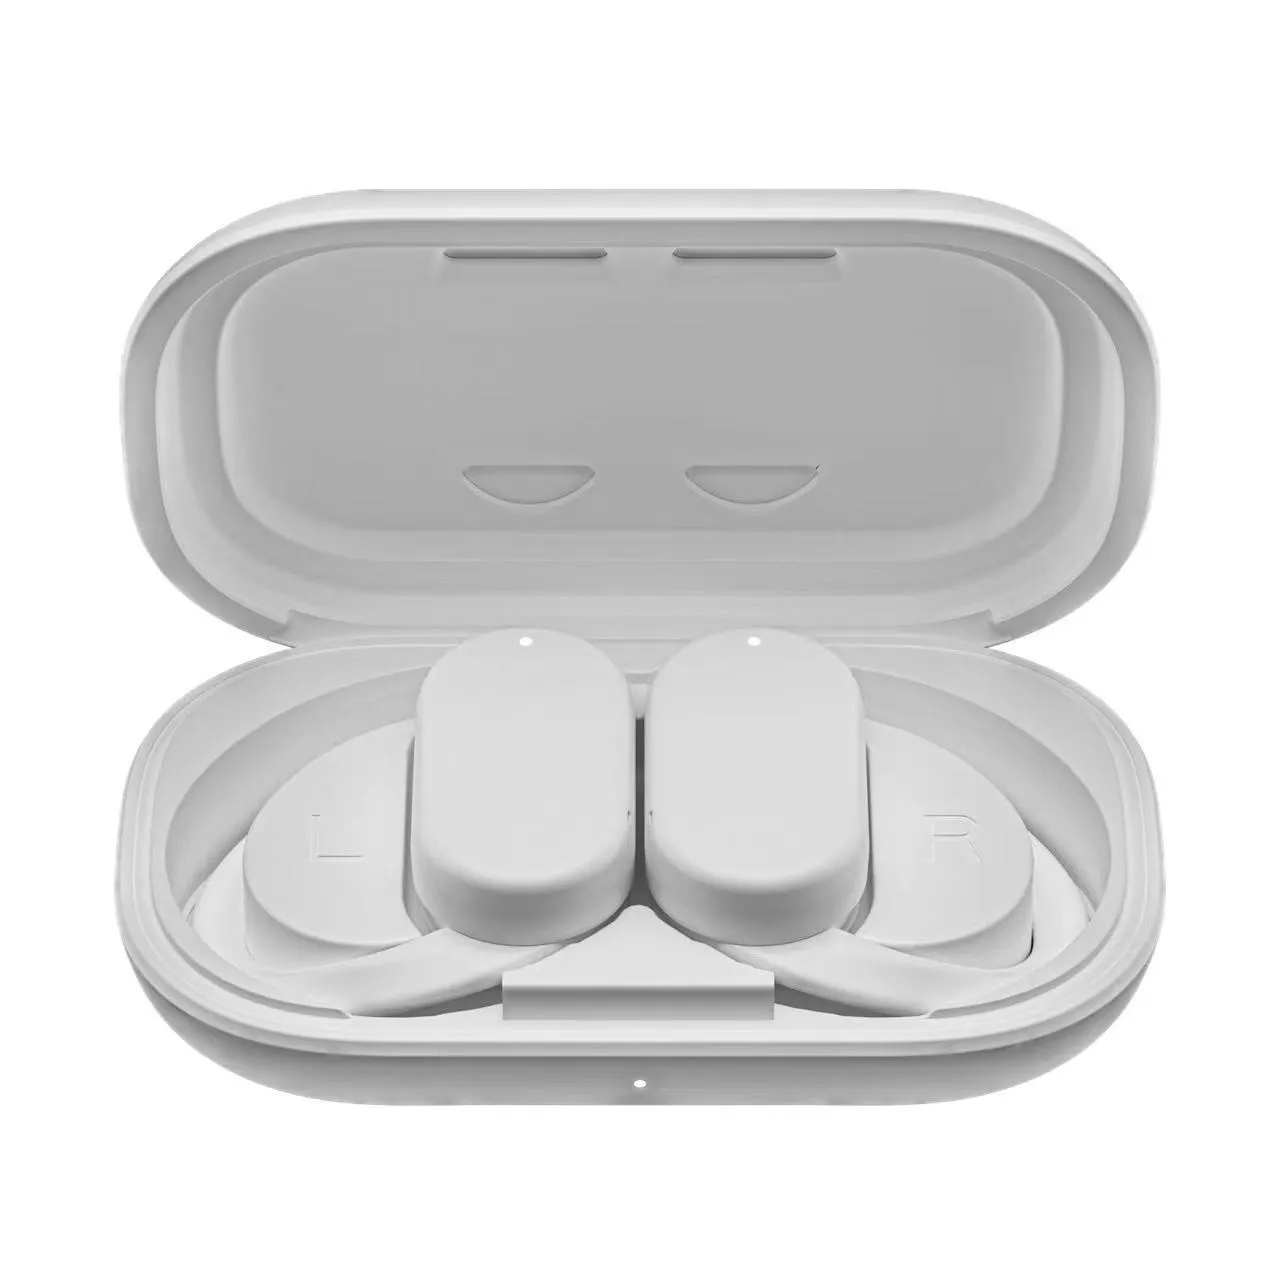 With Charger Box Gadgets Mini Bluetooth Wireless Earphones Ear Hook Headphones Headsets